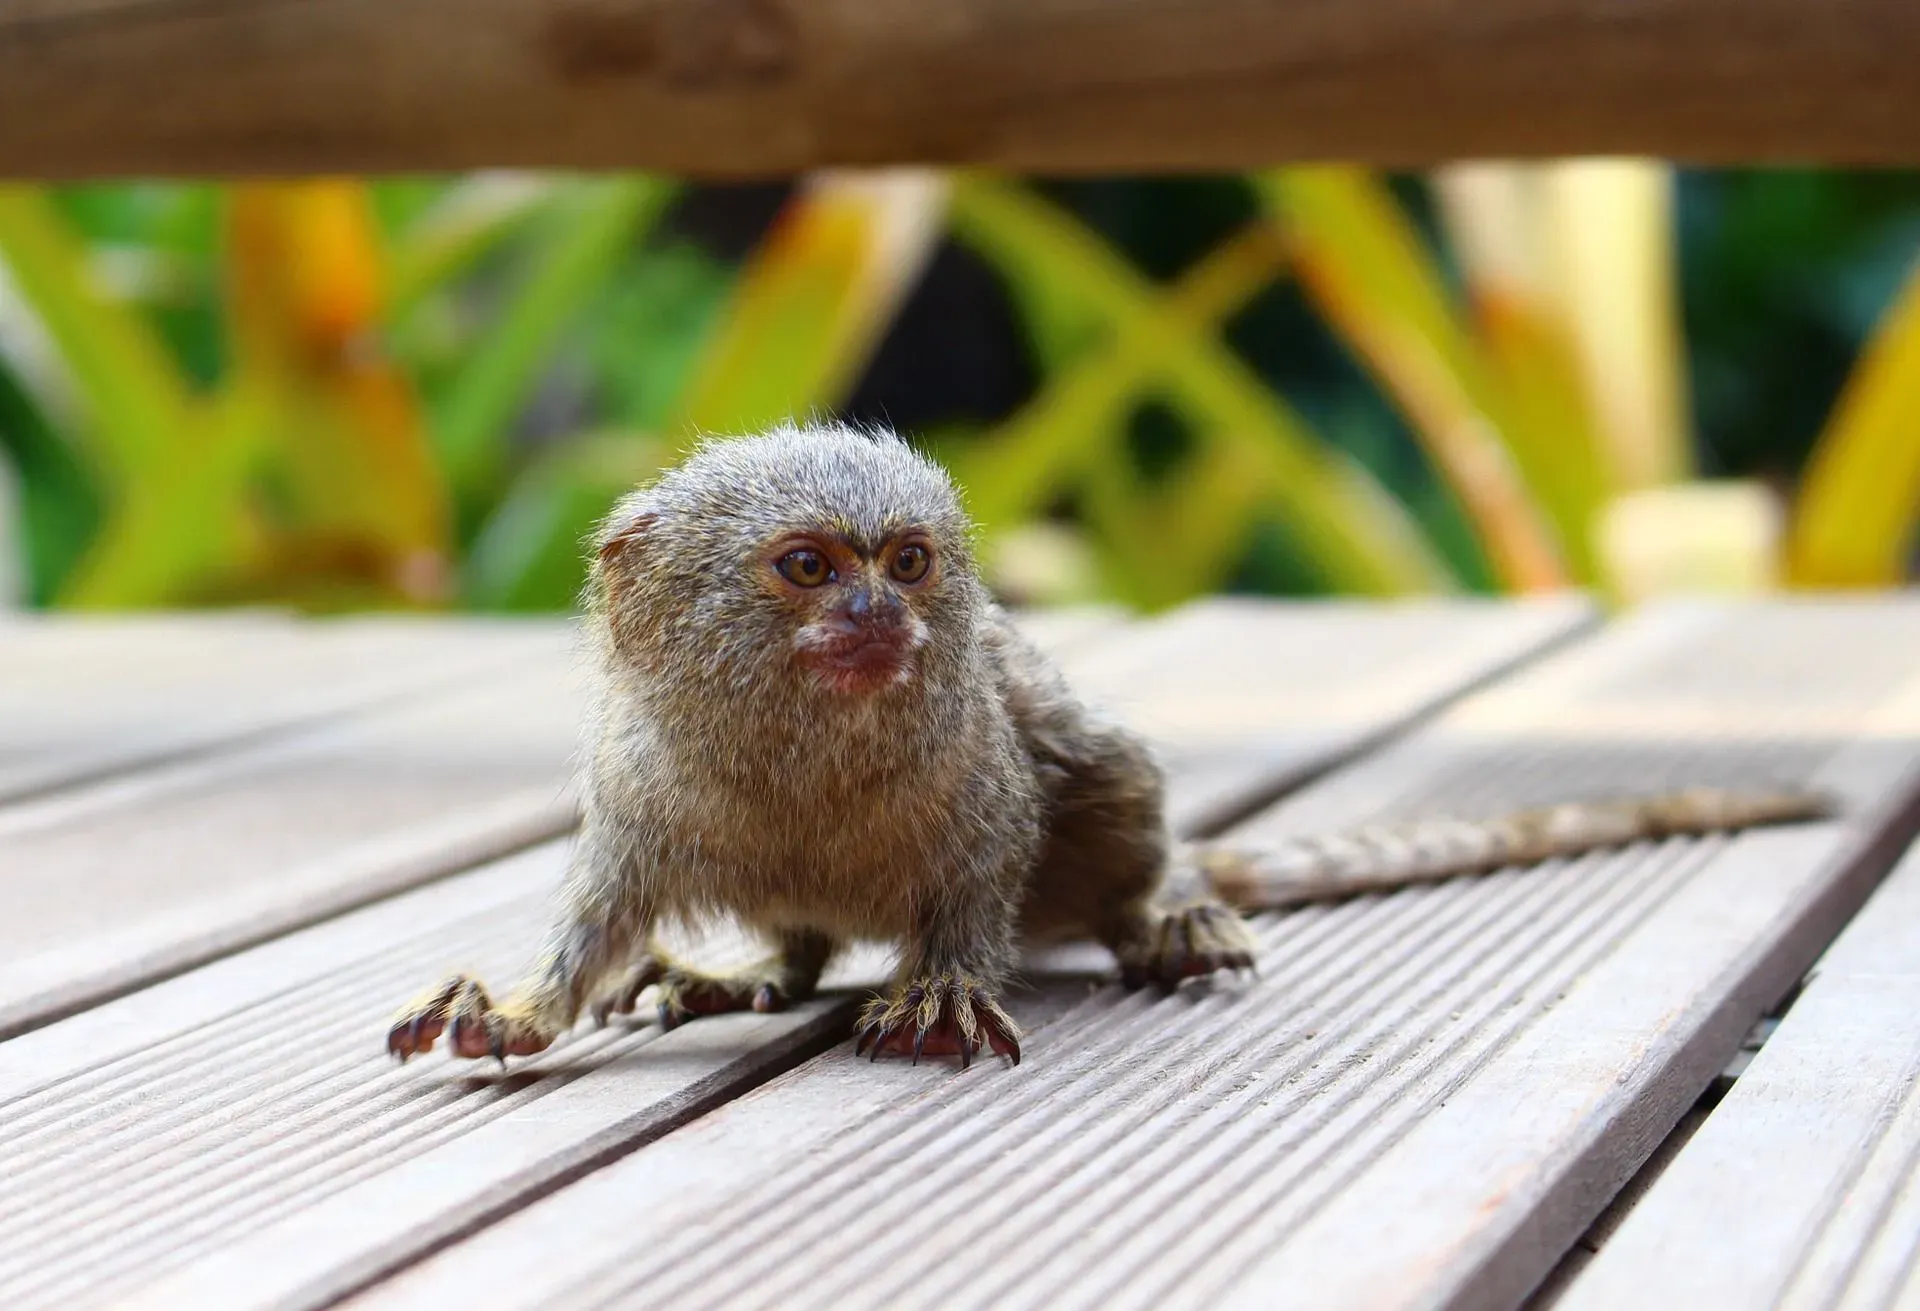 A pygmy marmoset is called a finger monkey because it is approximately the size of a human finger.